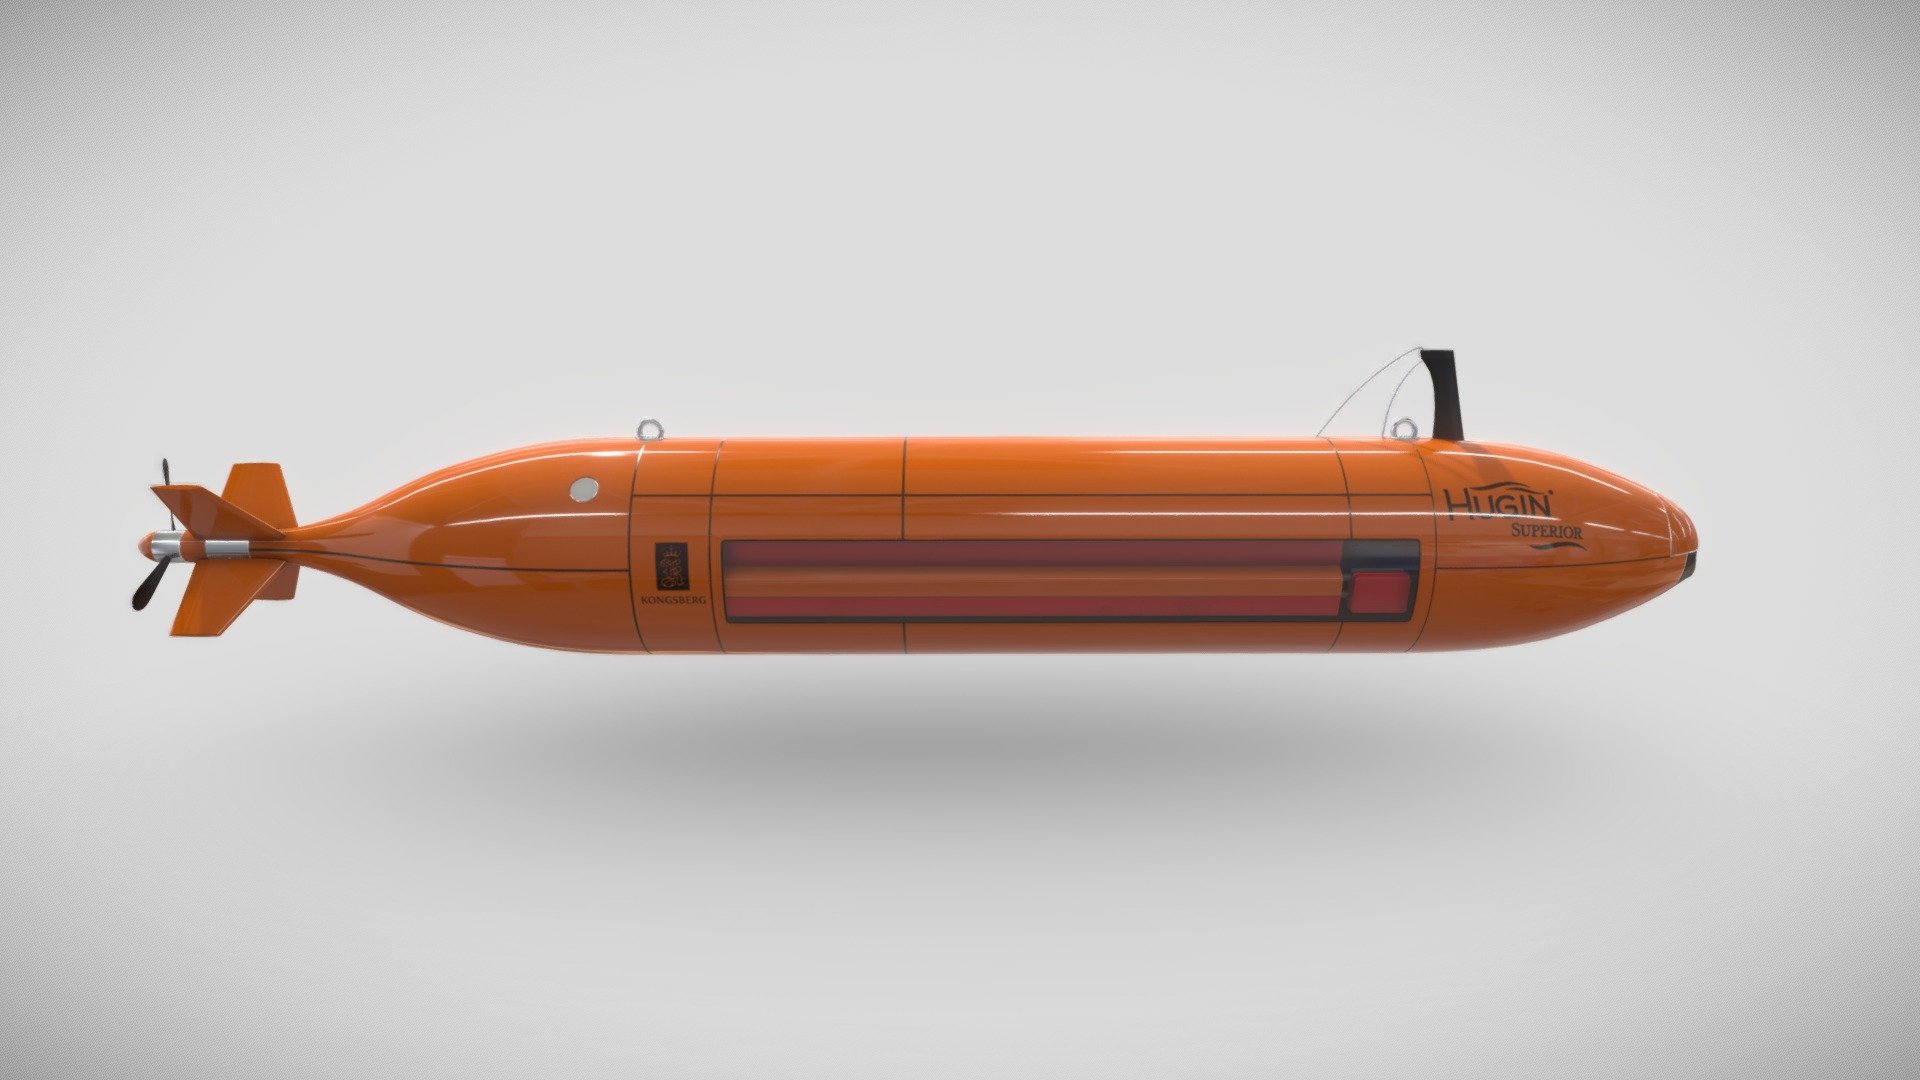 The Hugin superior is a AUV developed by Kongsberg 3d model